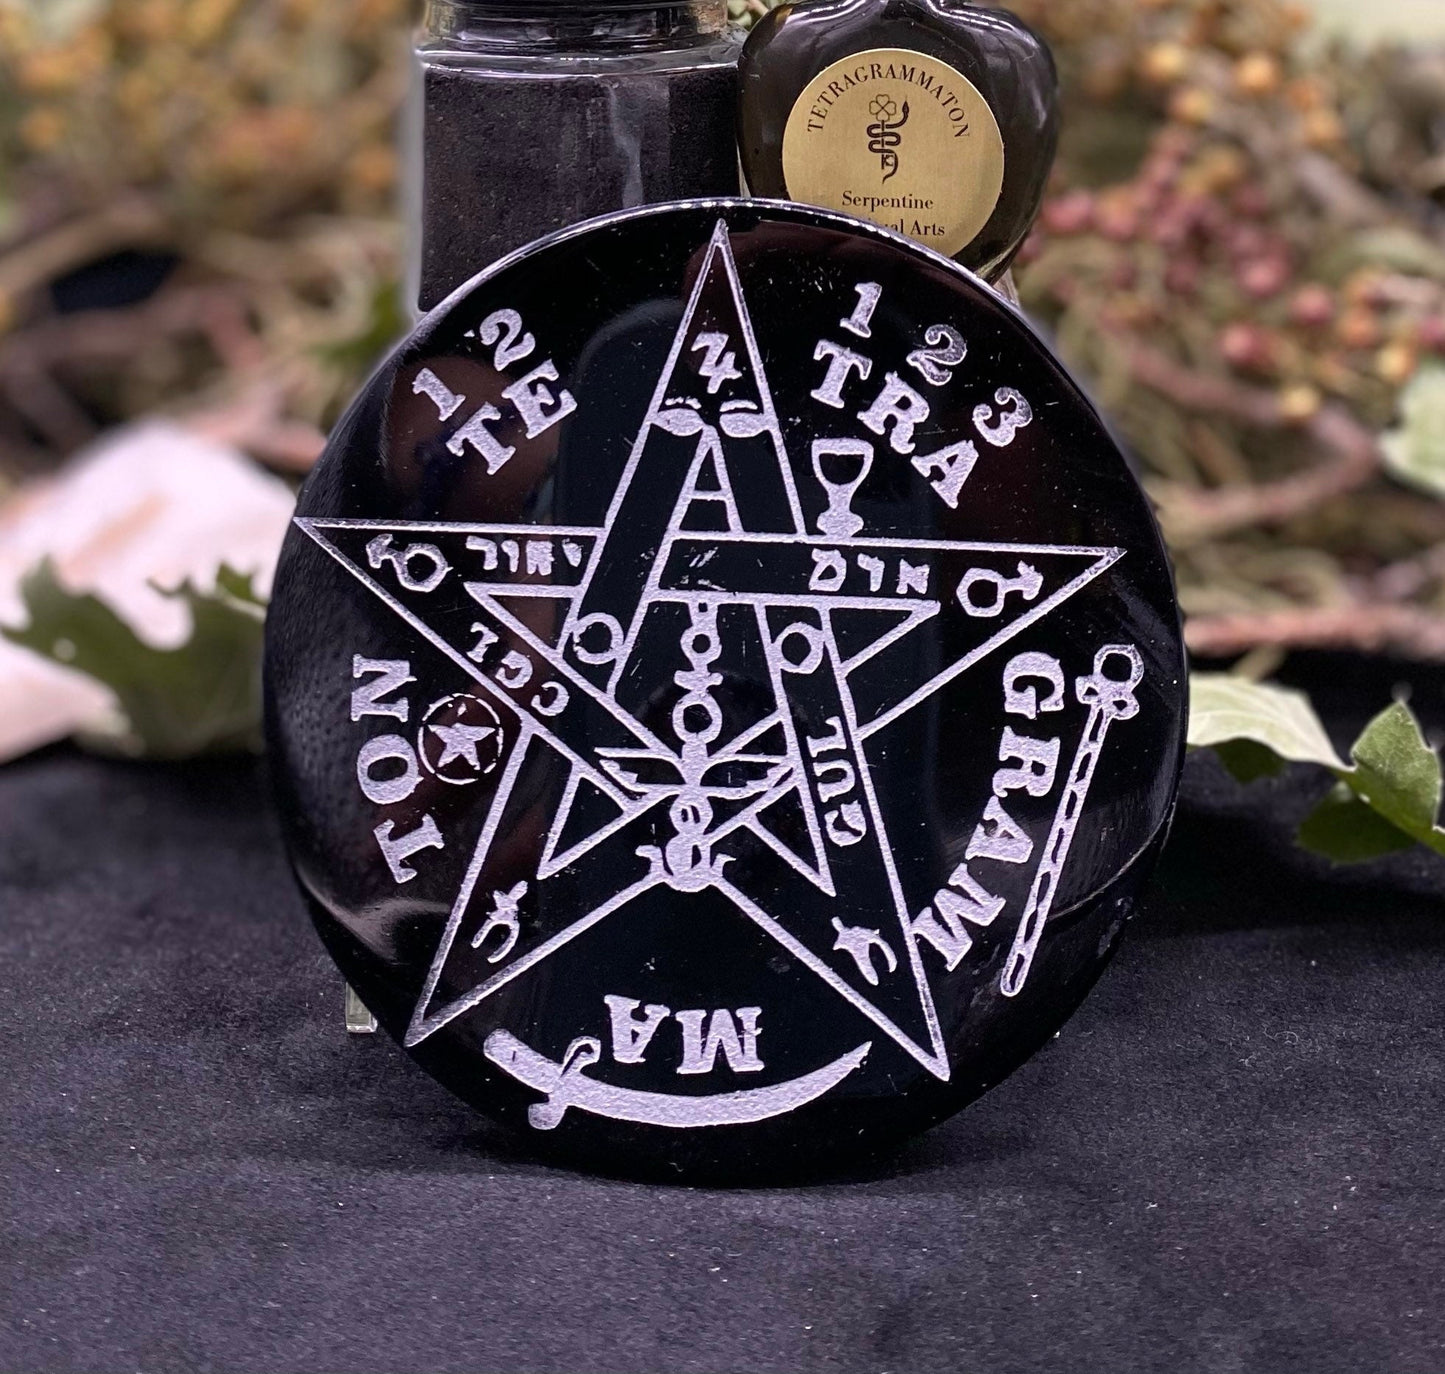 Tetragrammaton Incense & Oil Set (Aleister Crowley Recipe) + Our Favorite Incense + Ritually Charged + Ceremonial Magick + Sorcery